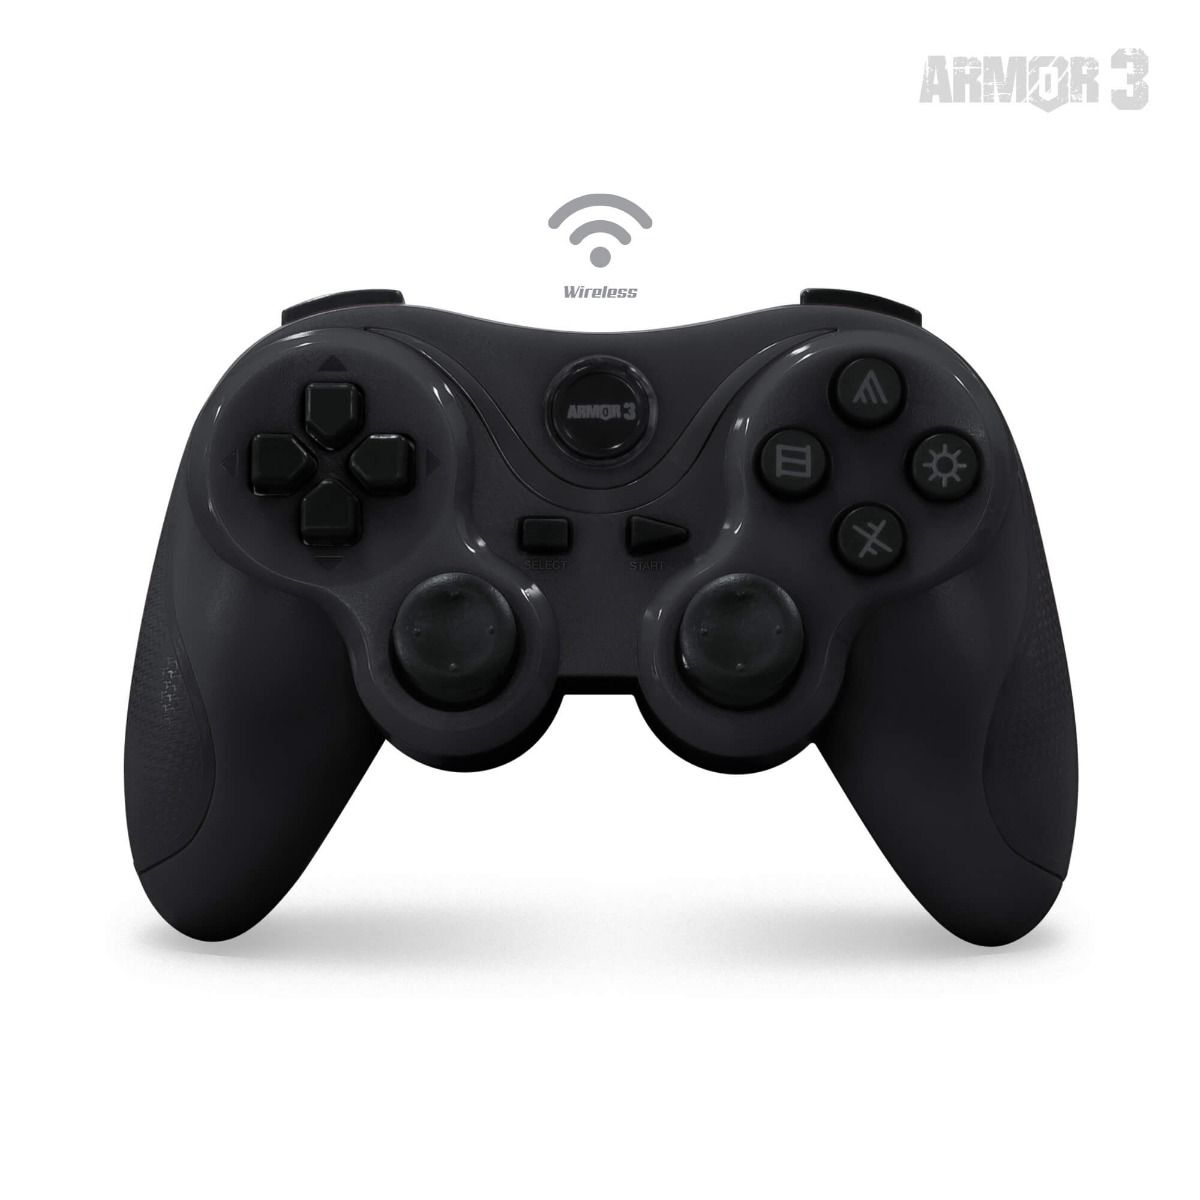 Armor 3 NuPlay PS3 Wireless Game Controller (Black) - Geek-Is-Us